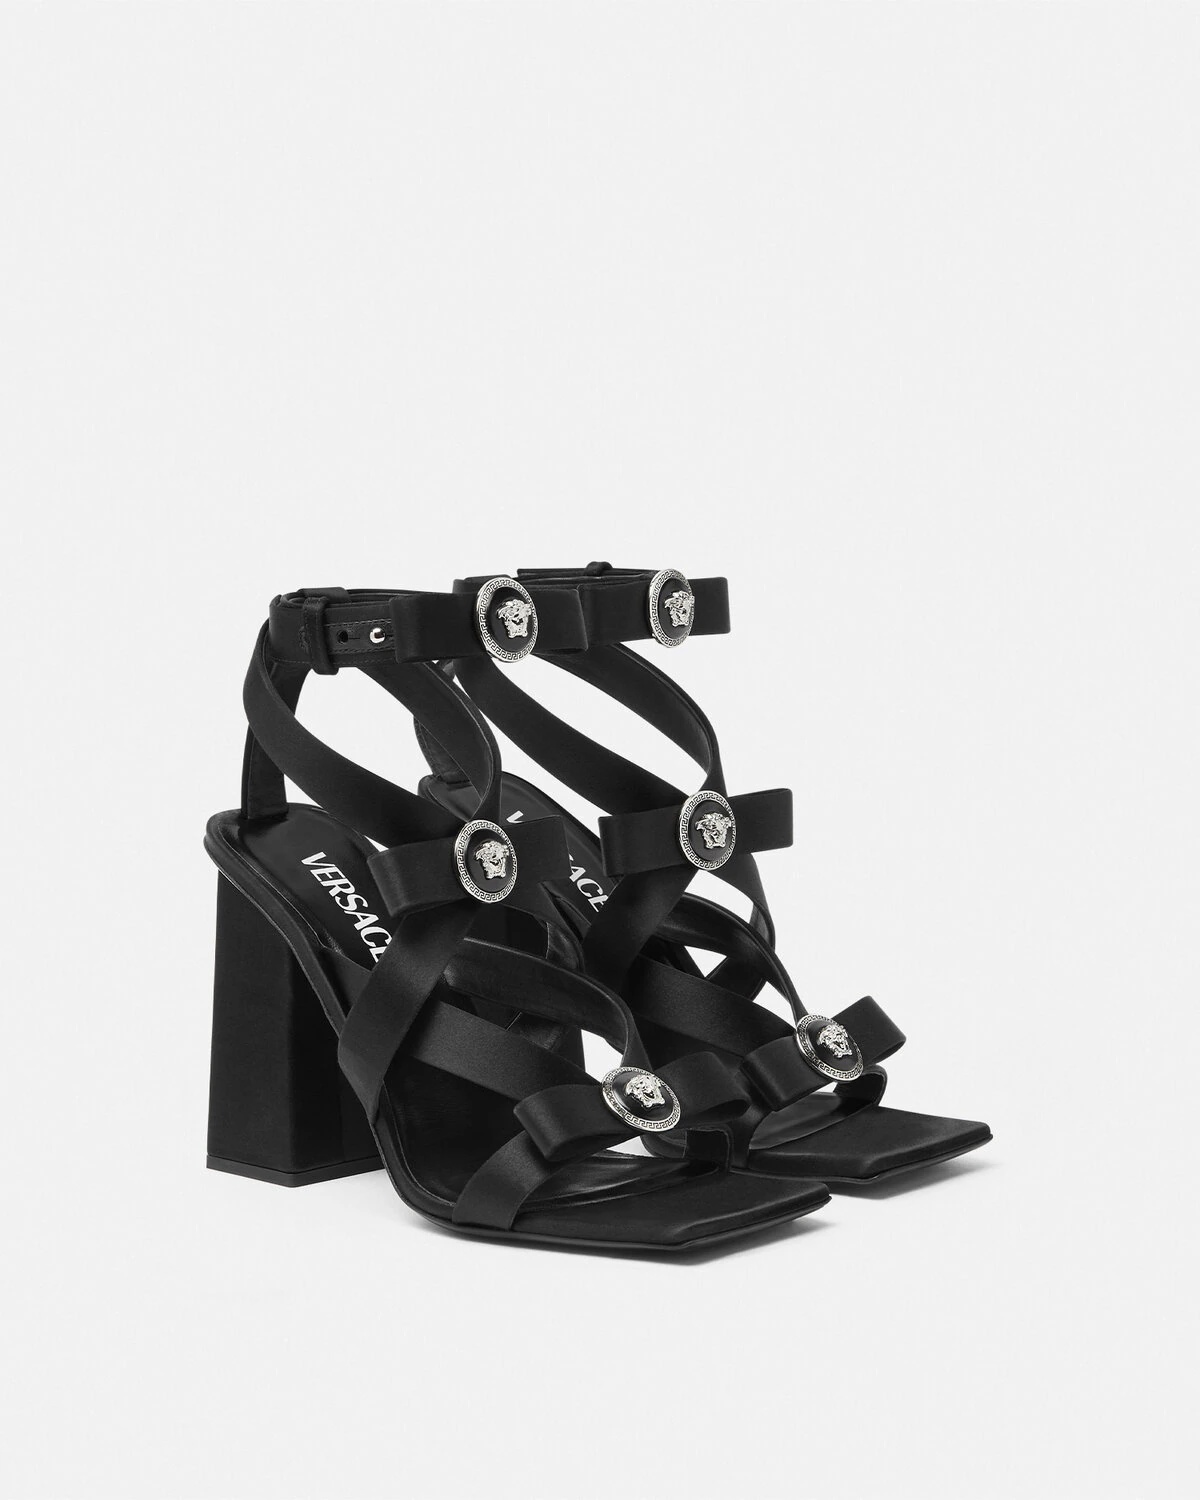 Gianni Ribbon Satin Cage Sandals 105 mm - 2